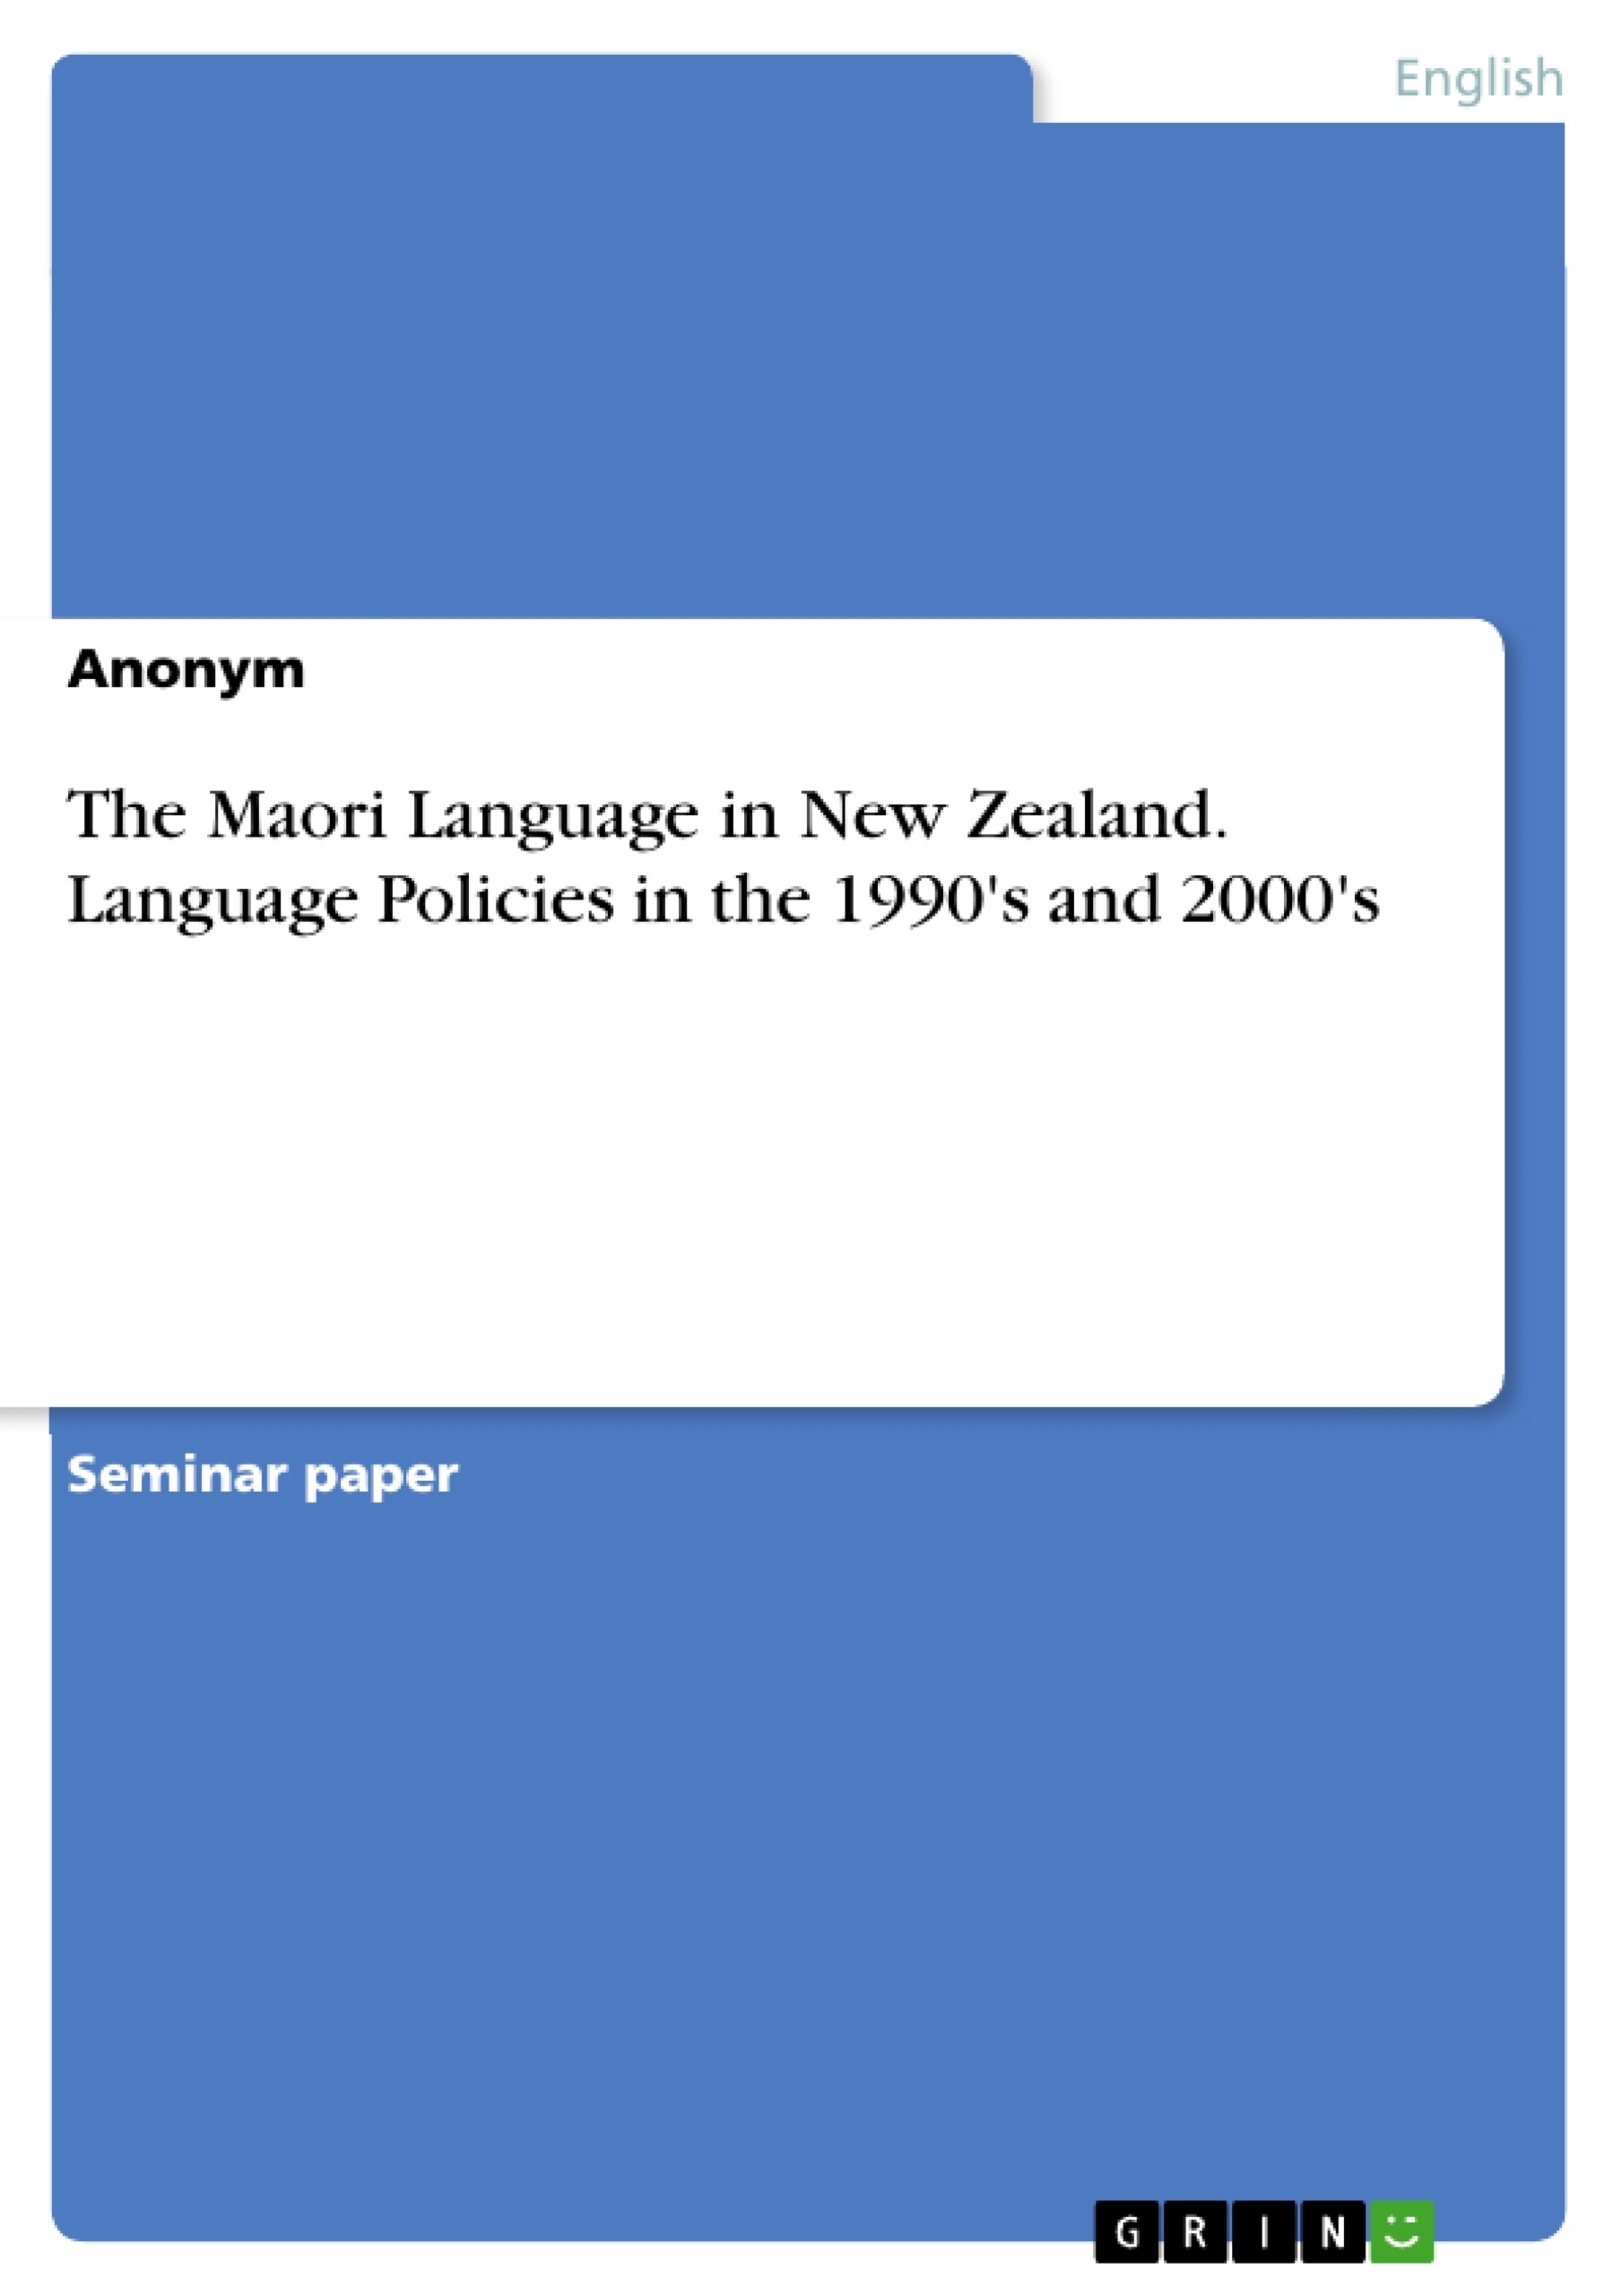 Título: The Maori Language in New Zealand. Language Policies in the 1990's and 2000's